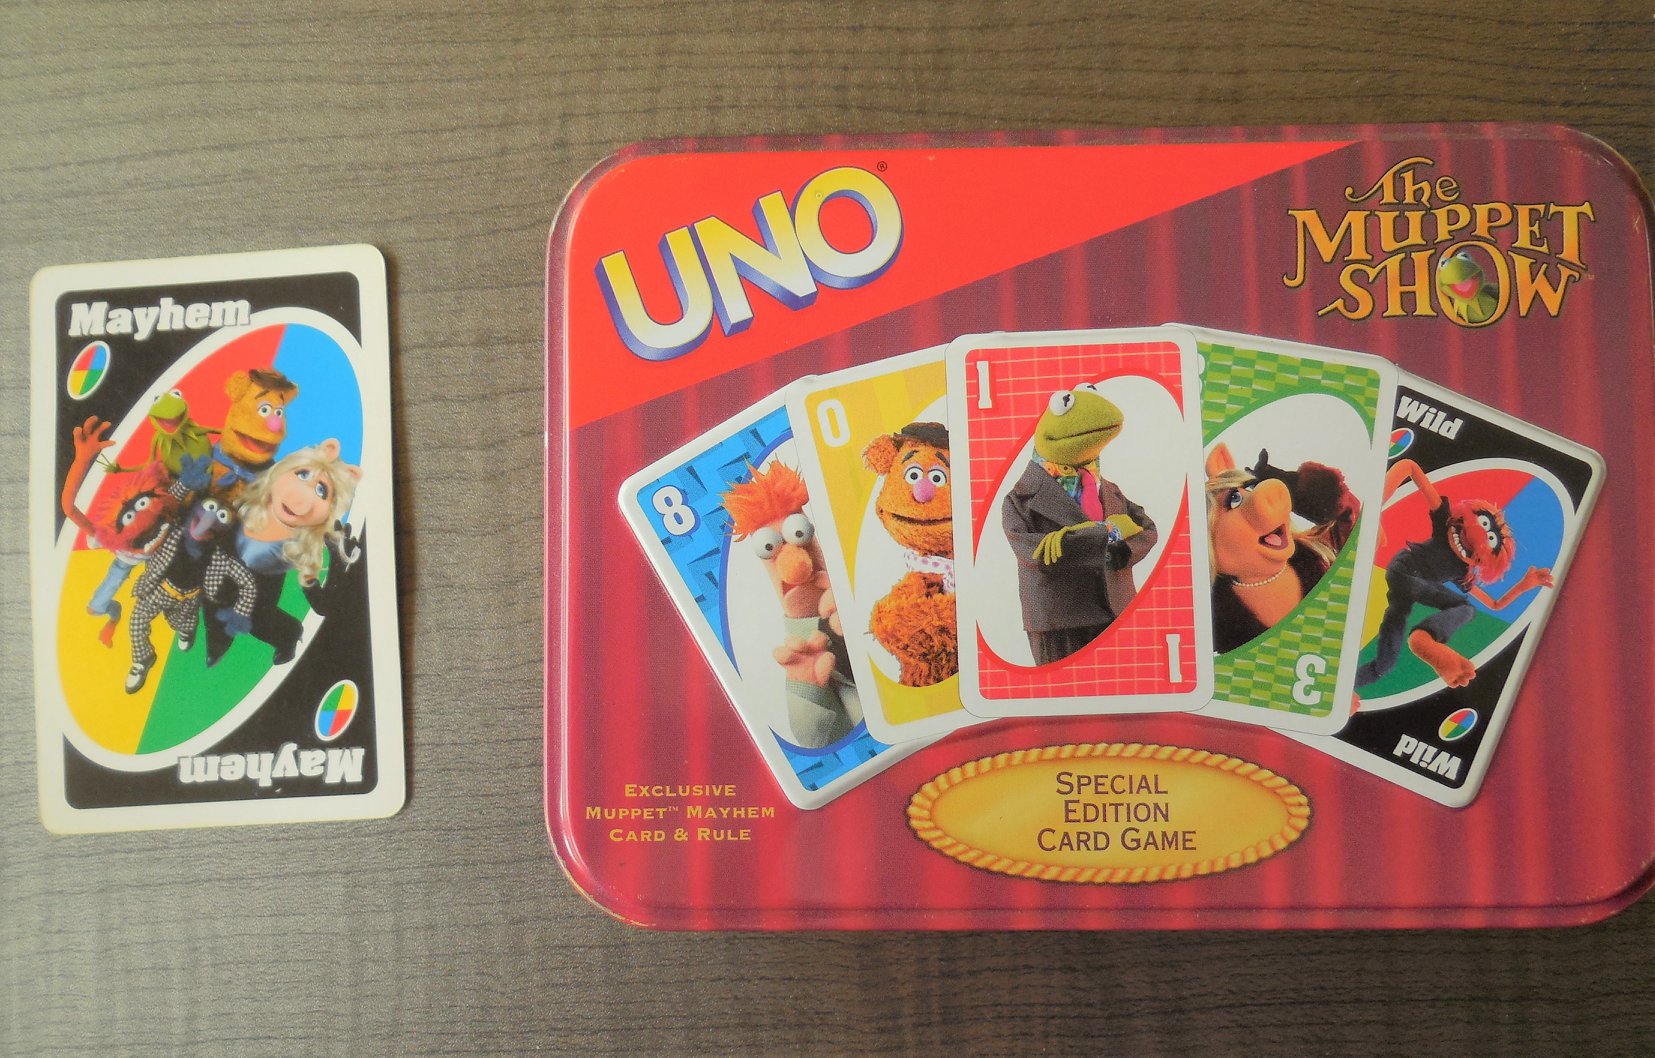 The Muppet Show Uno Card Game